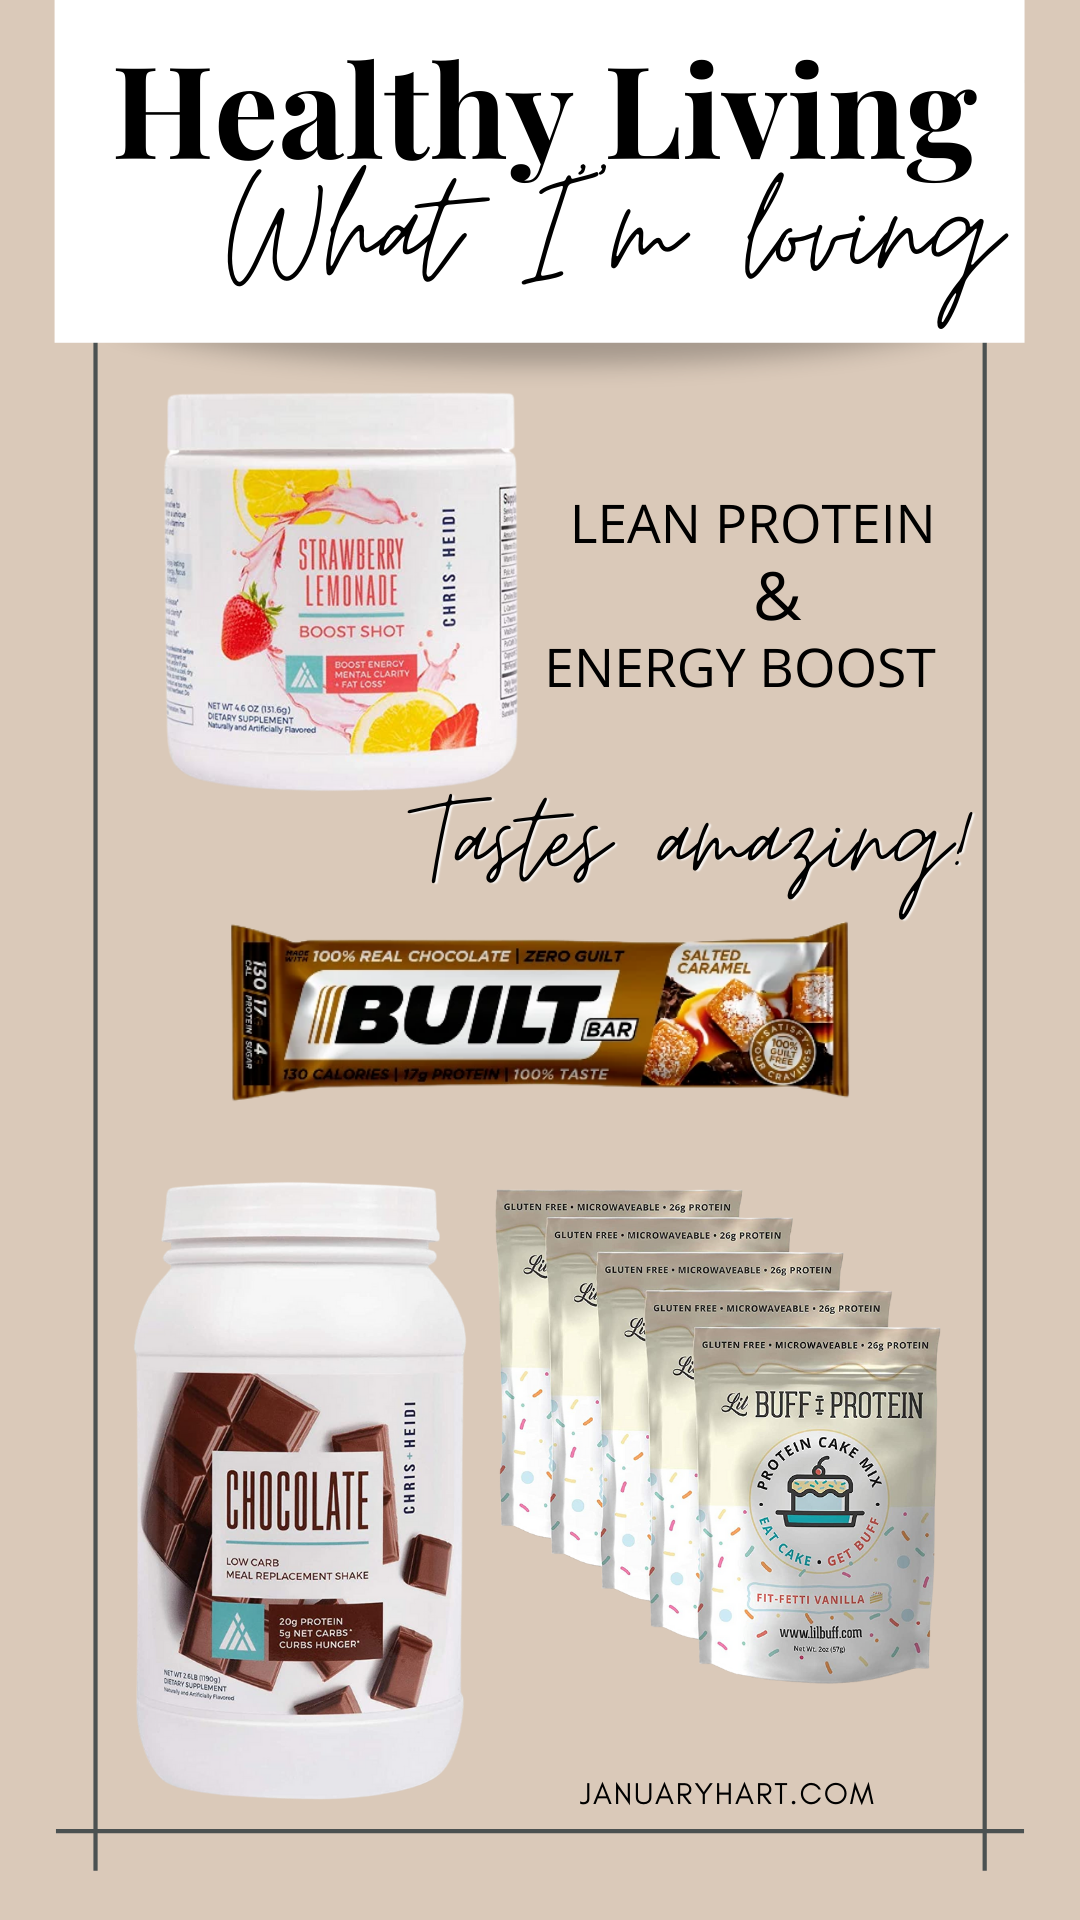 Lean protein finds